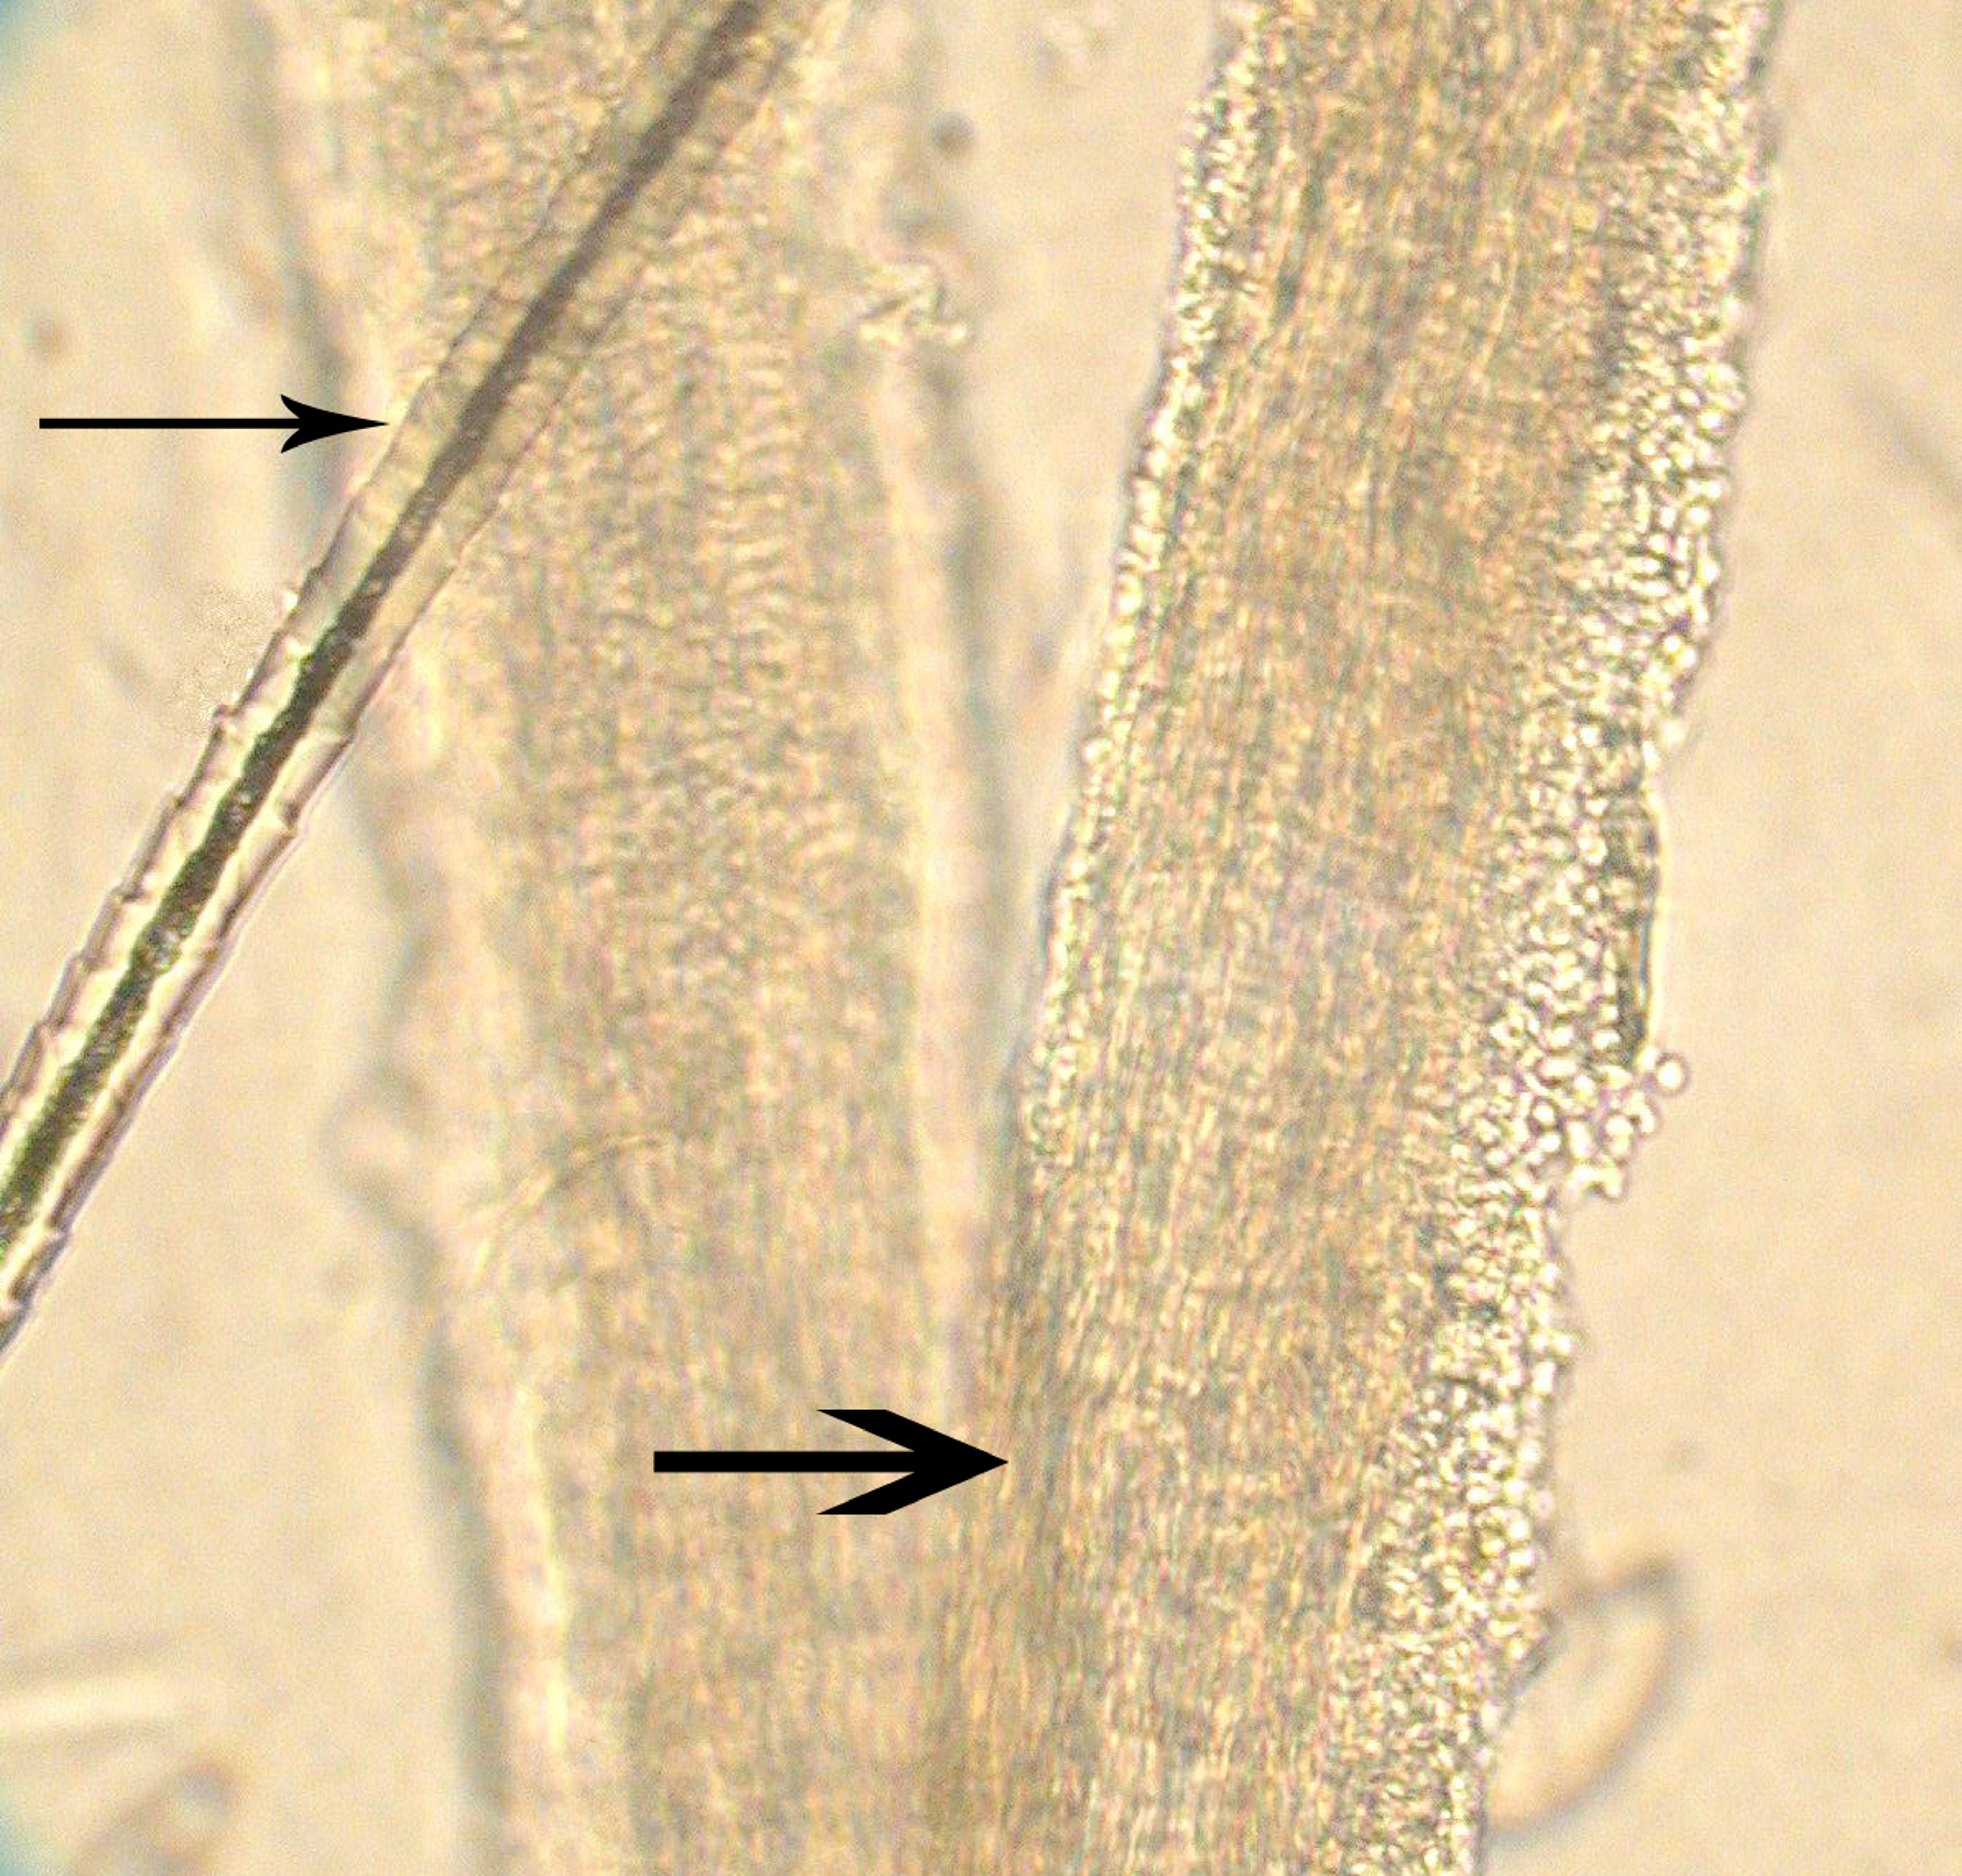 Normal hair and an <i >M canis</i>-infected hair